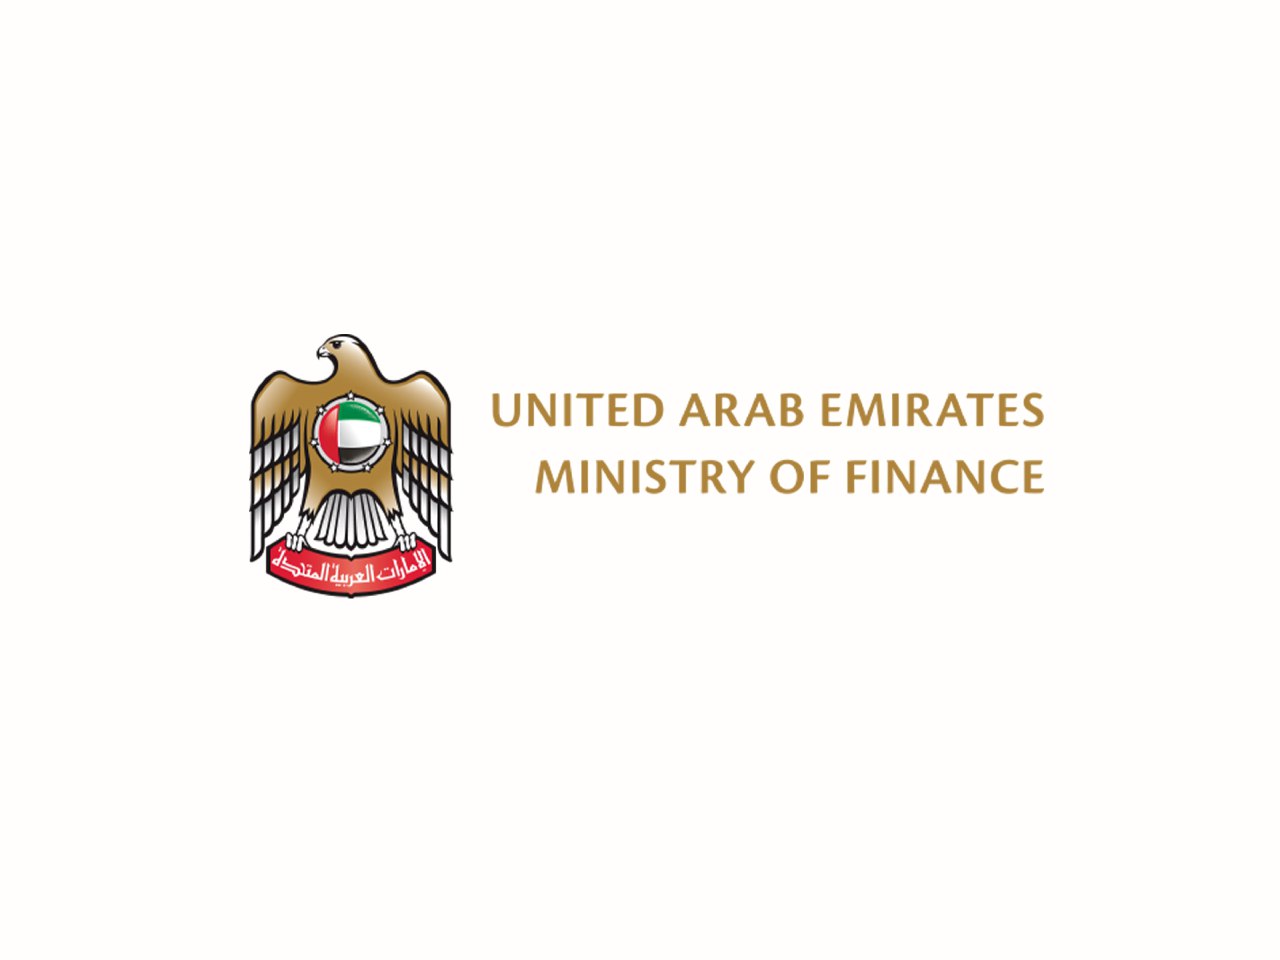 Ministerial Decision No. 114 of 2023 on the Accounting Standards and Methods for the Purposes of Federal Decree-Law No. 47 of 2022 on the Taxation of Corporations and Businesses